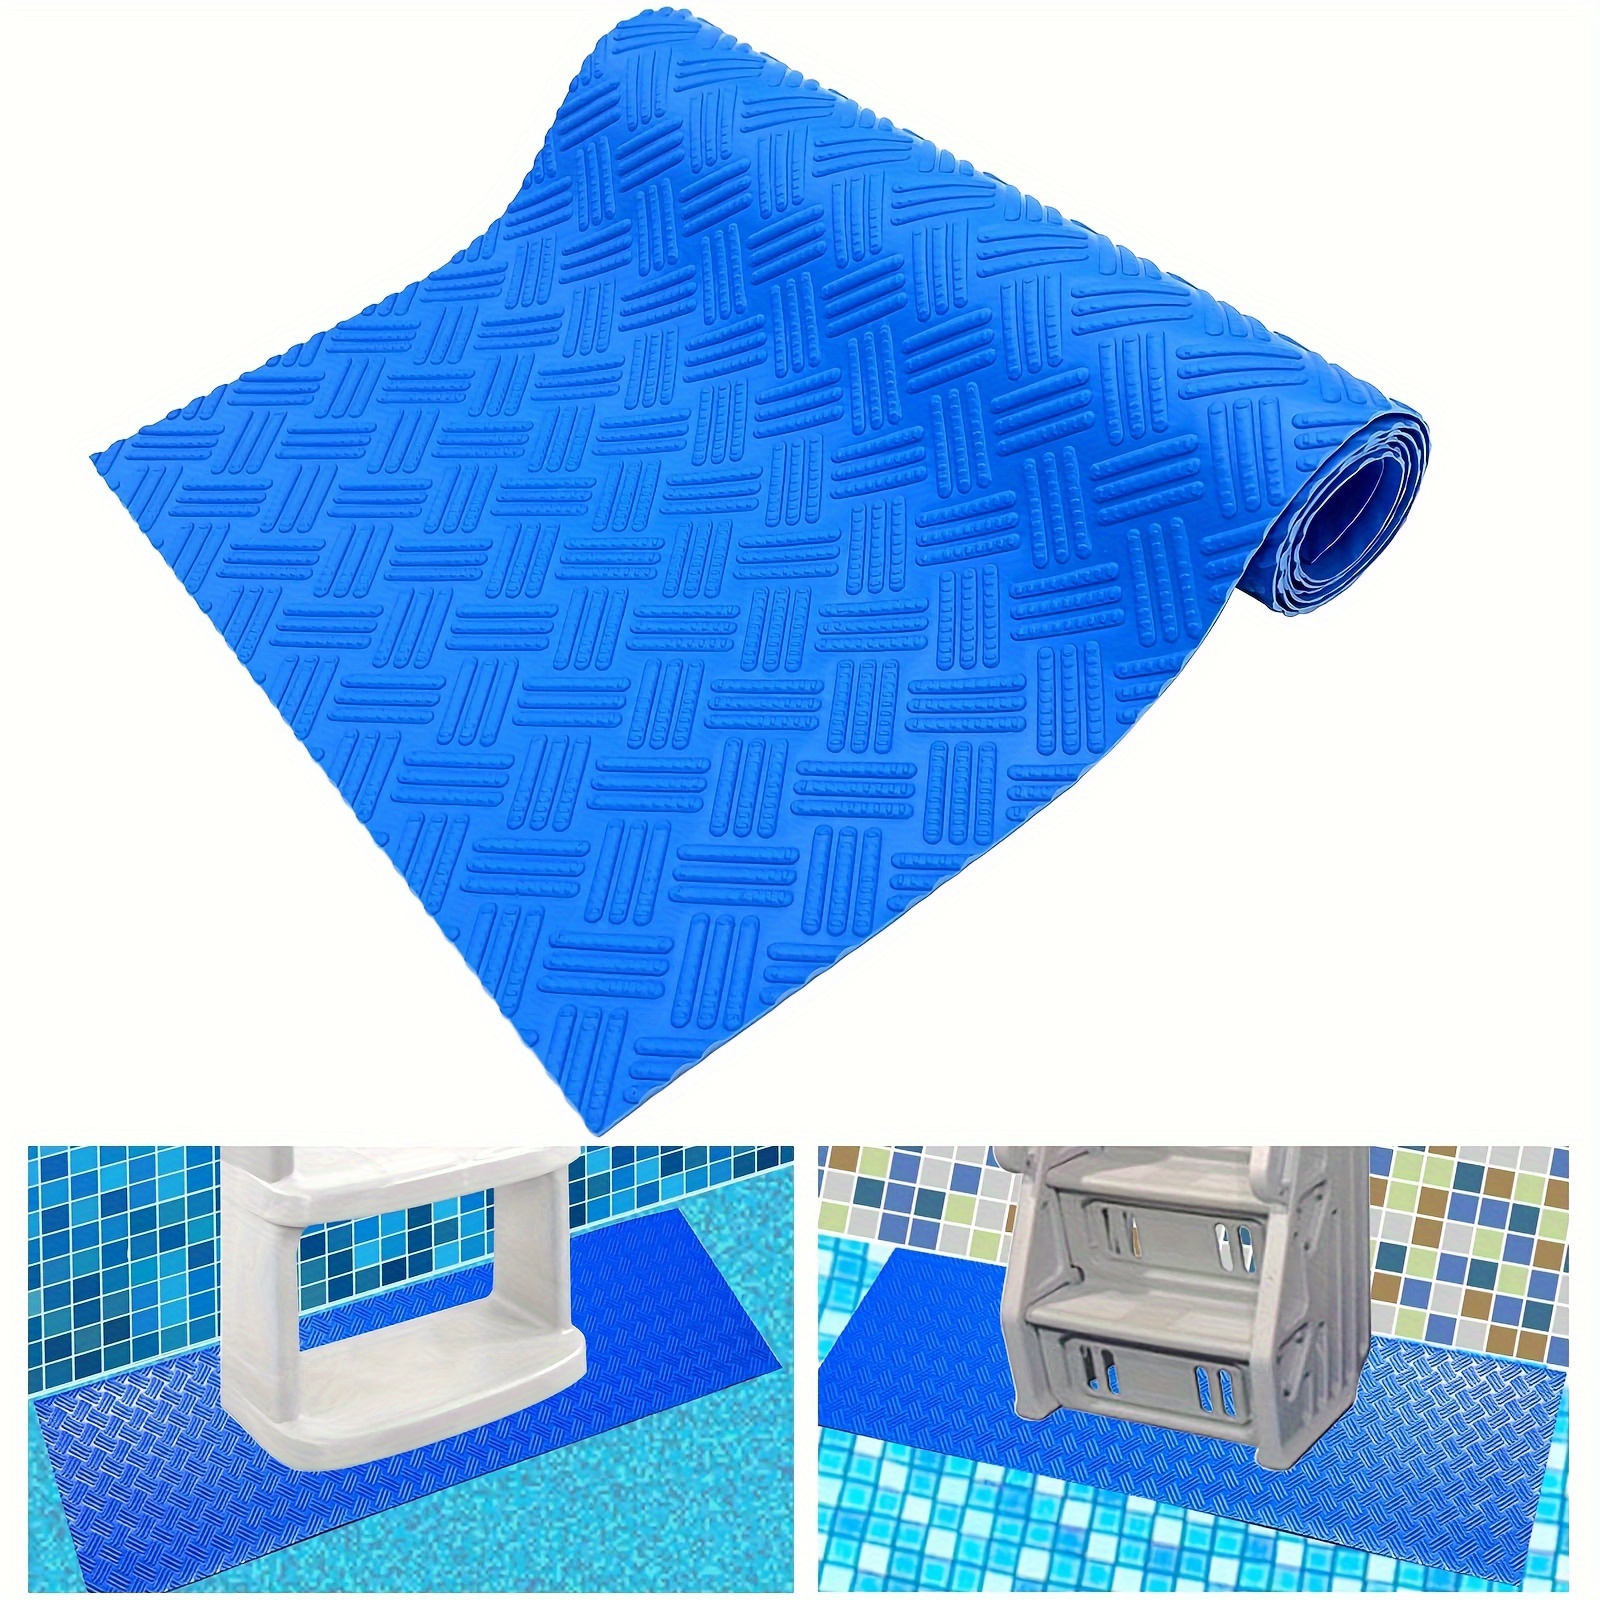 

1pc Non-slip Textured Blue Pvc Pool Ladder Mat, Step Protector For Bathrooms And Pools, Multiple Sizes Available